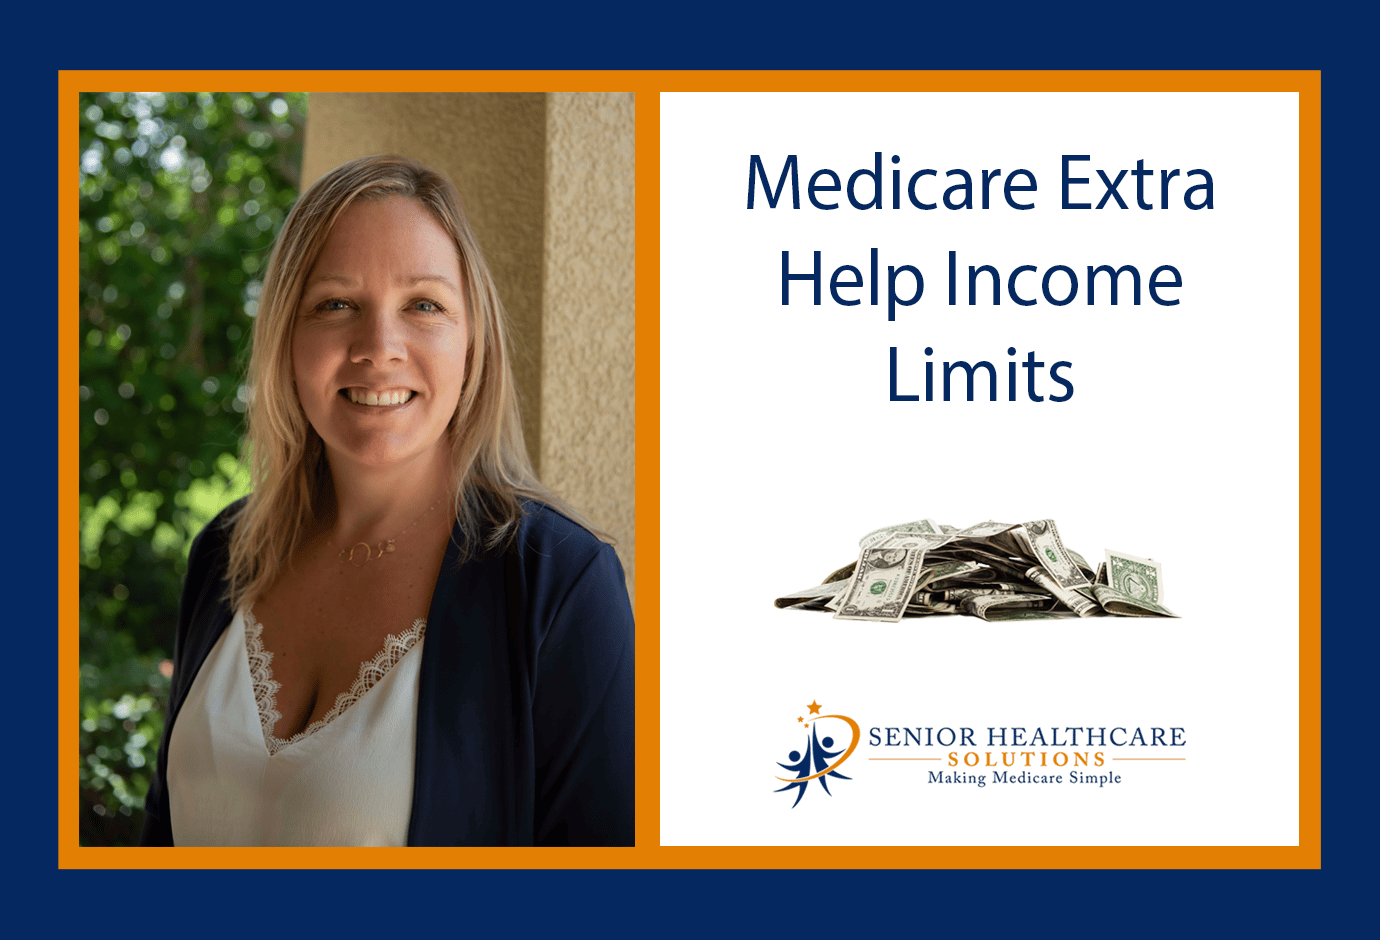 Medicare Extra Help Limits Senior HealthCare Solutions